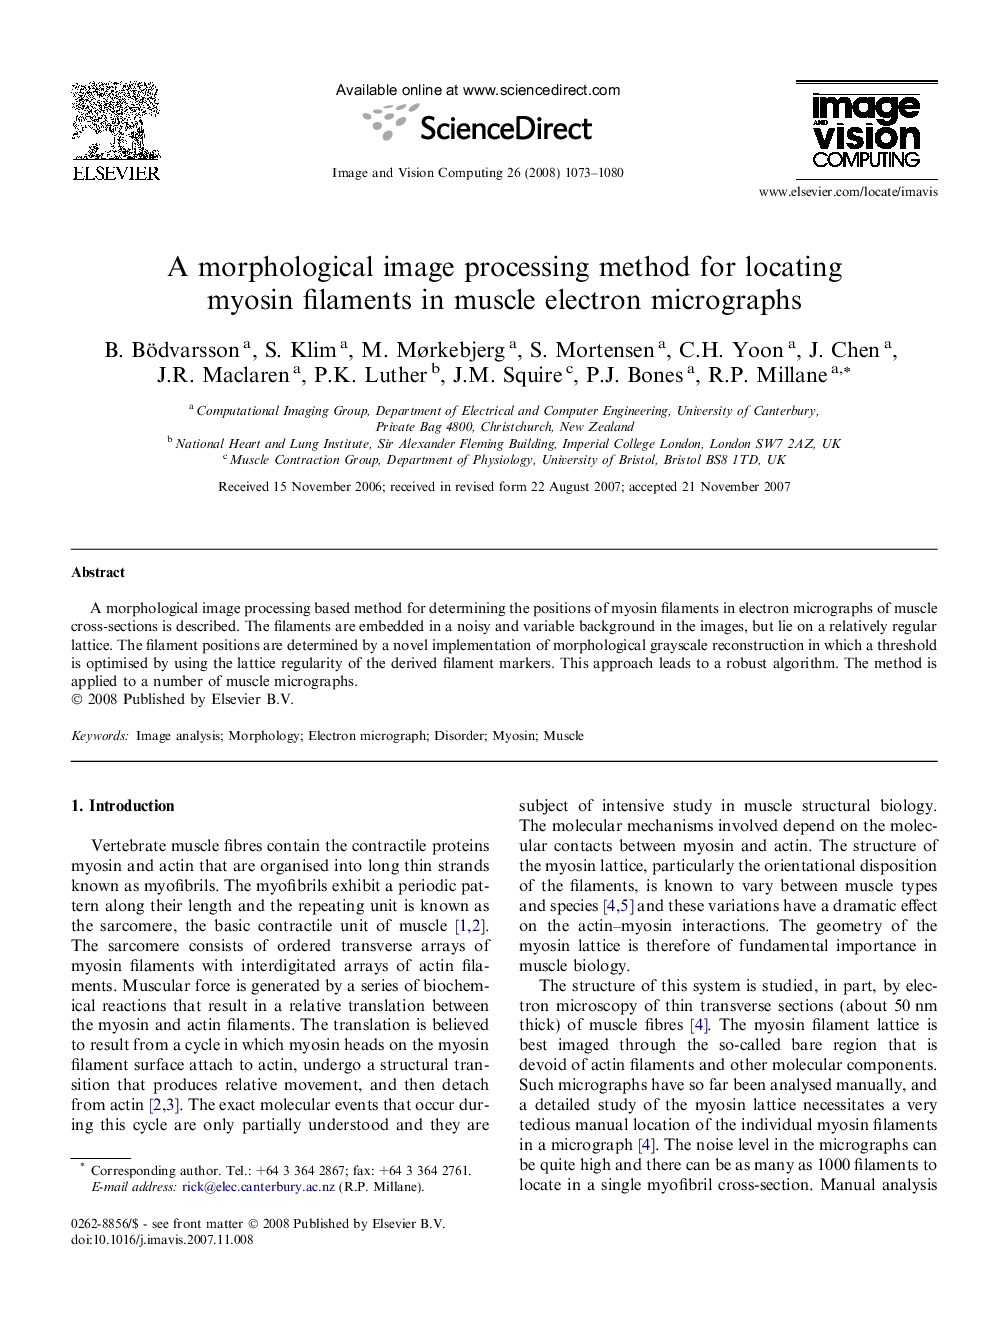 A morphological image processing method for locating myosin filaments in muscle electron micrographs